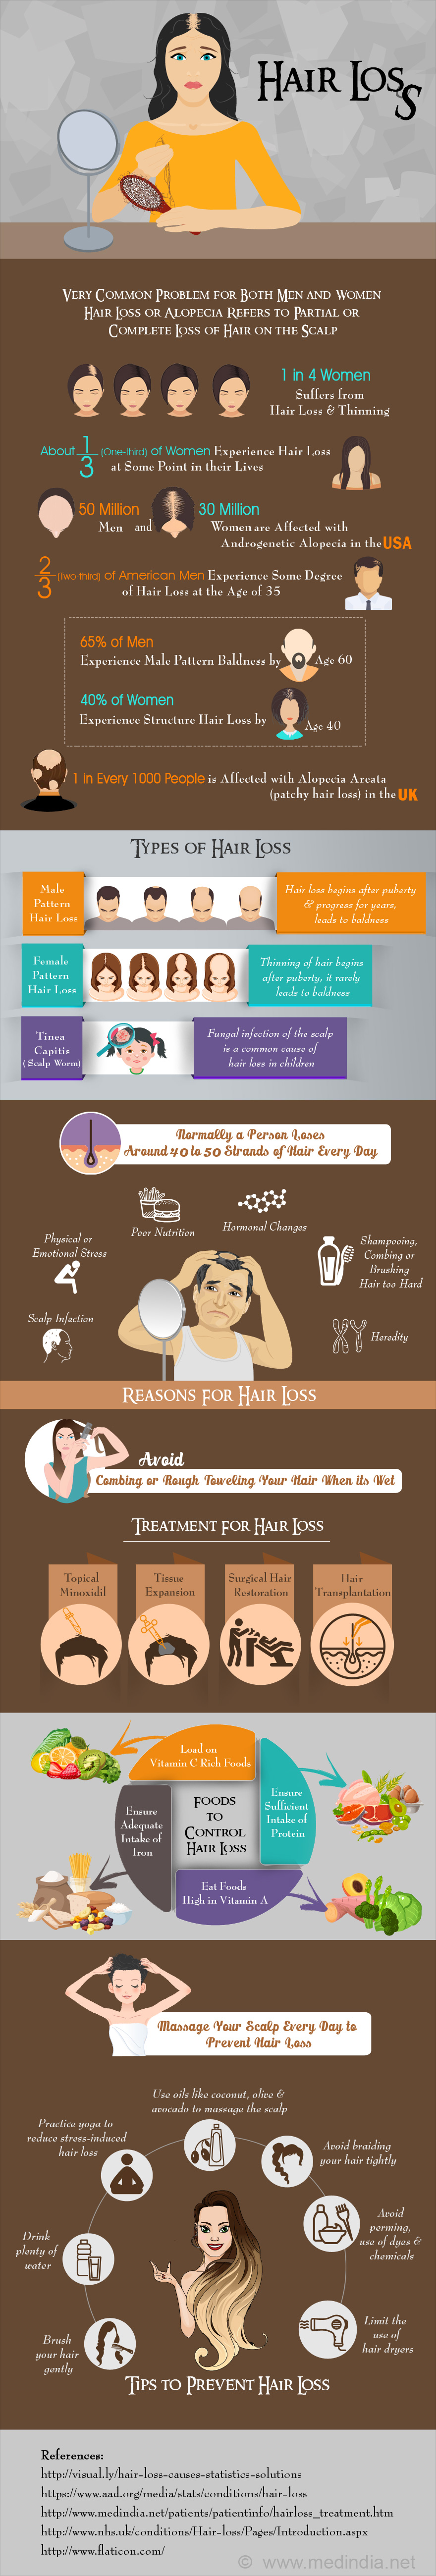 Infographic On Hair Loss